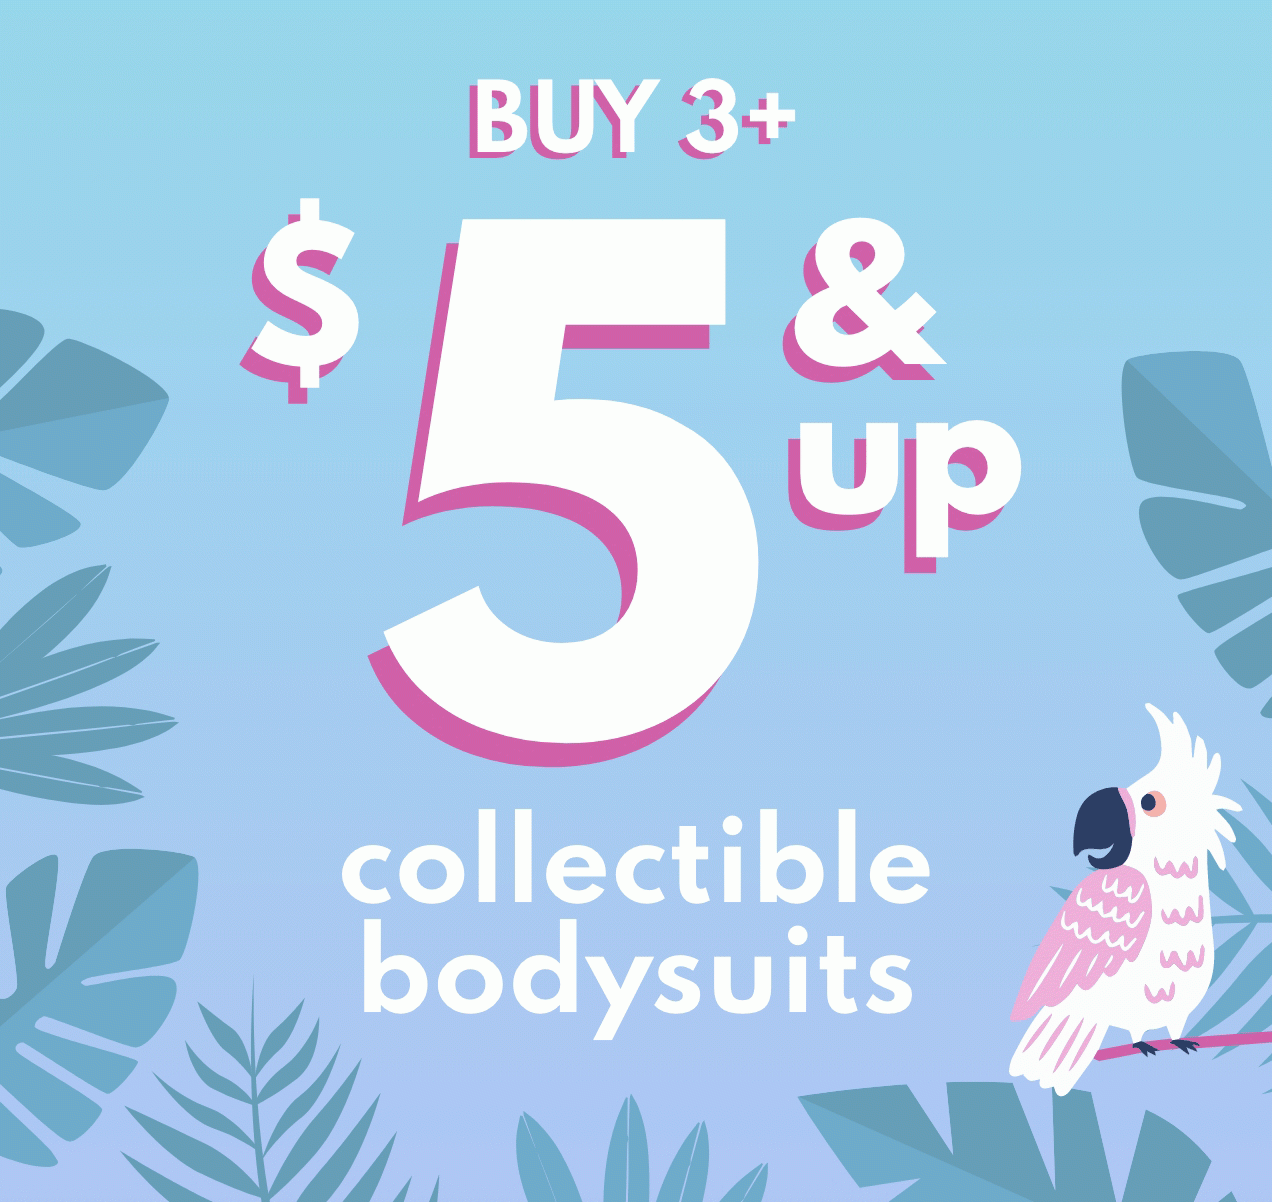 BUY 3+ | $5 & up | collectible | bodysuits